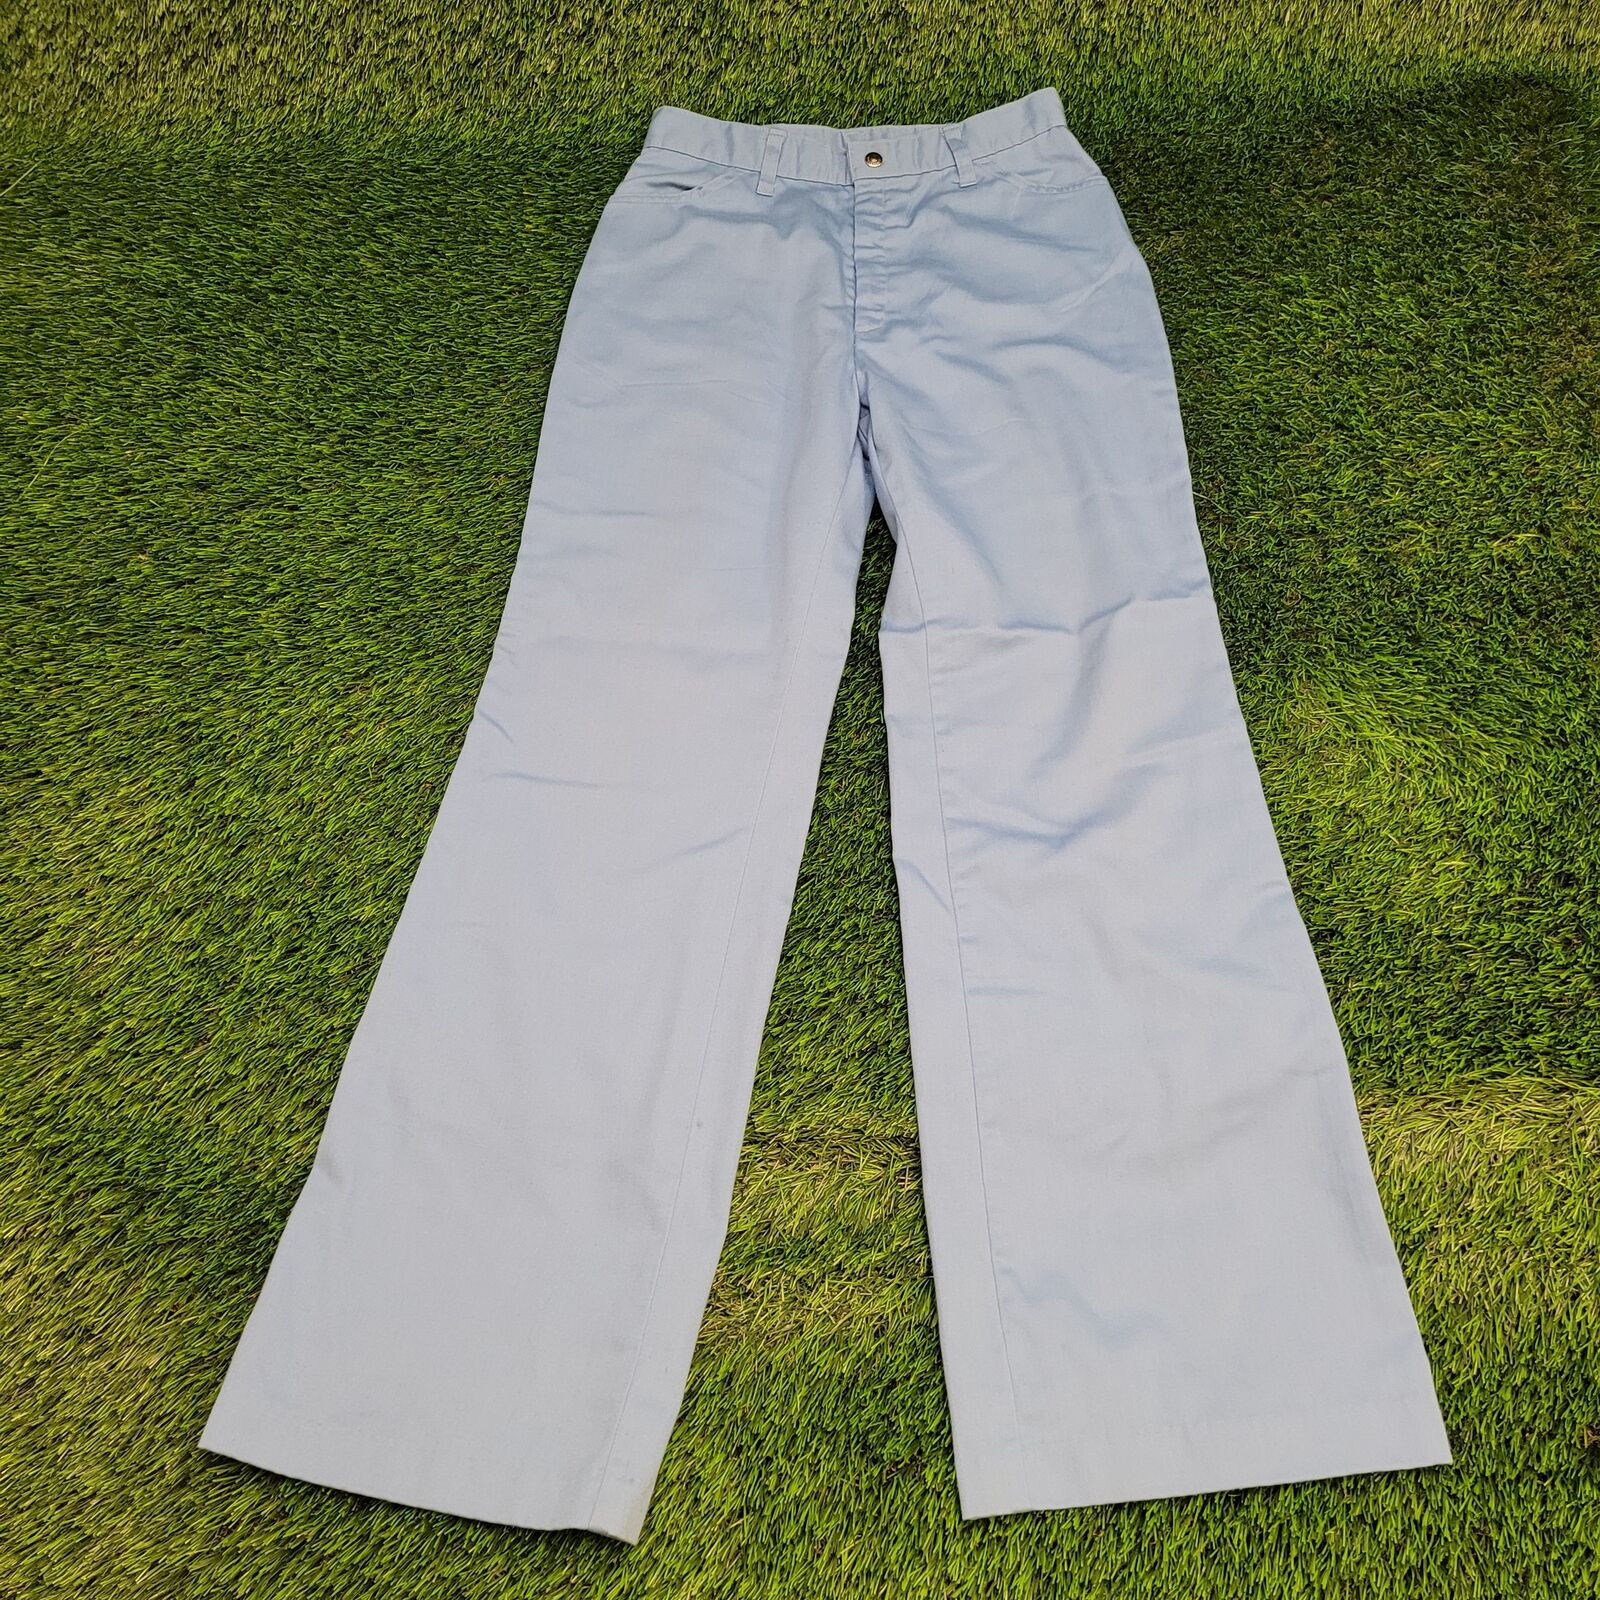 Vintage 70s LEVIS Blue-Tab Flared Disco Pants 27x31 Straight Baby Light Blue USA